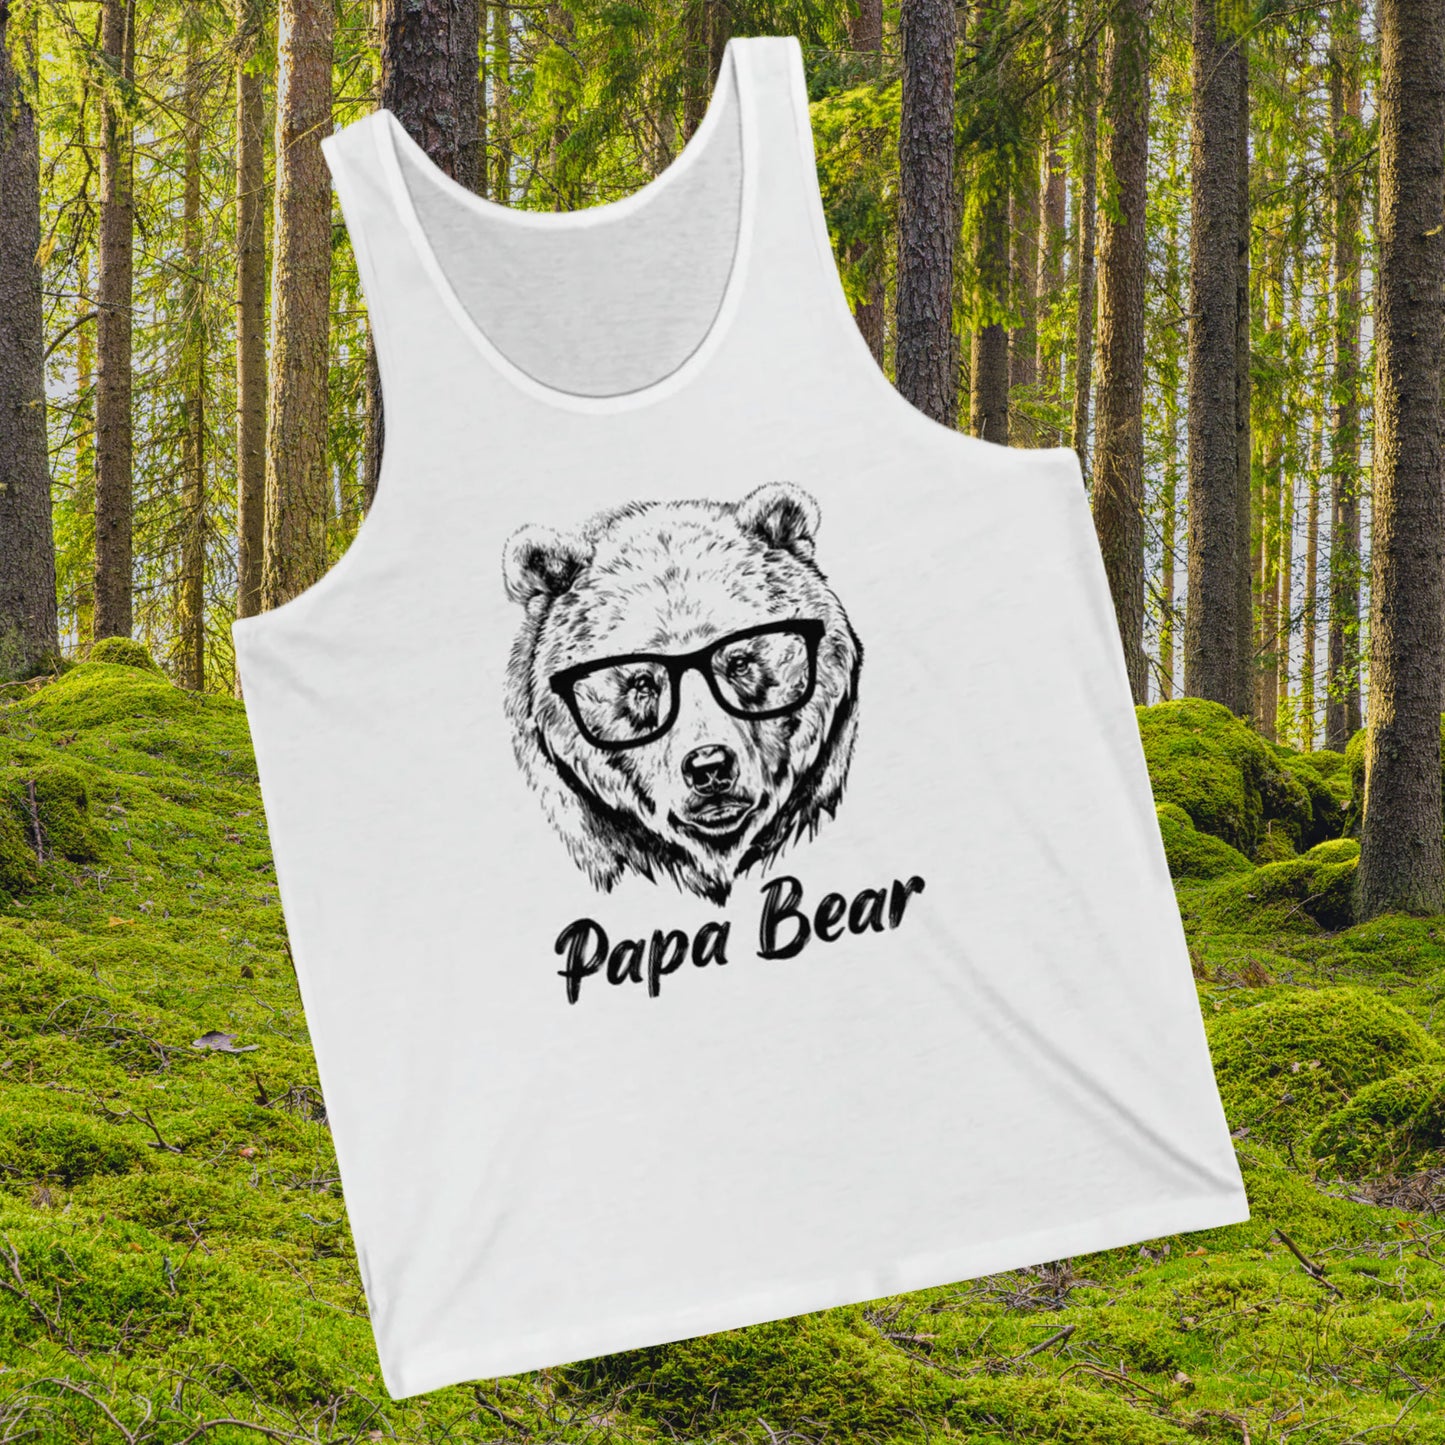 Papa Bear Tank Top For Protective Parent Tank For Dad Shirt For Father's Day Gift For Dad Shirt For Grandpa Shirt For Men